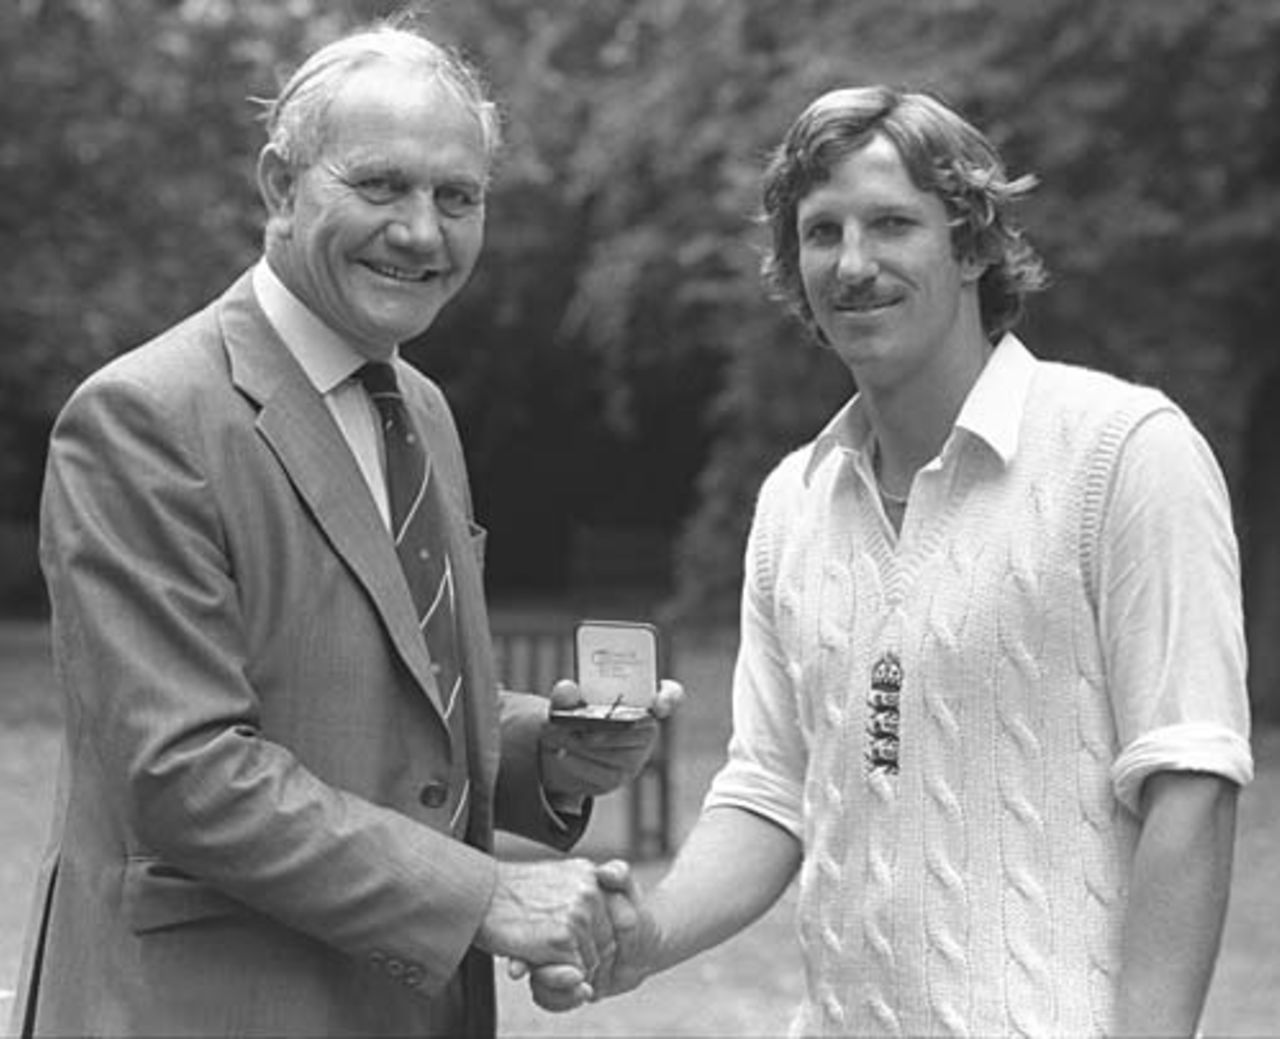 Alec Bedser presents Ian Botham with a special Cornhill Medal for taking the fastest ever 100 Test wickets, England v India, Lord's, August 1979 